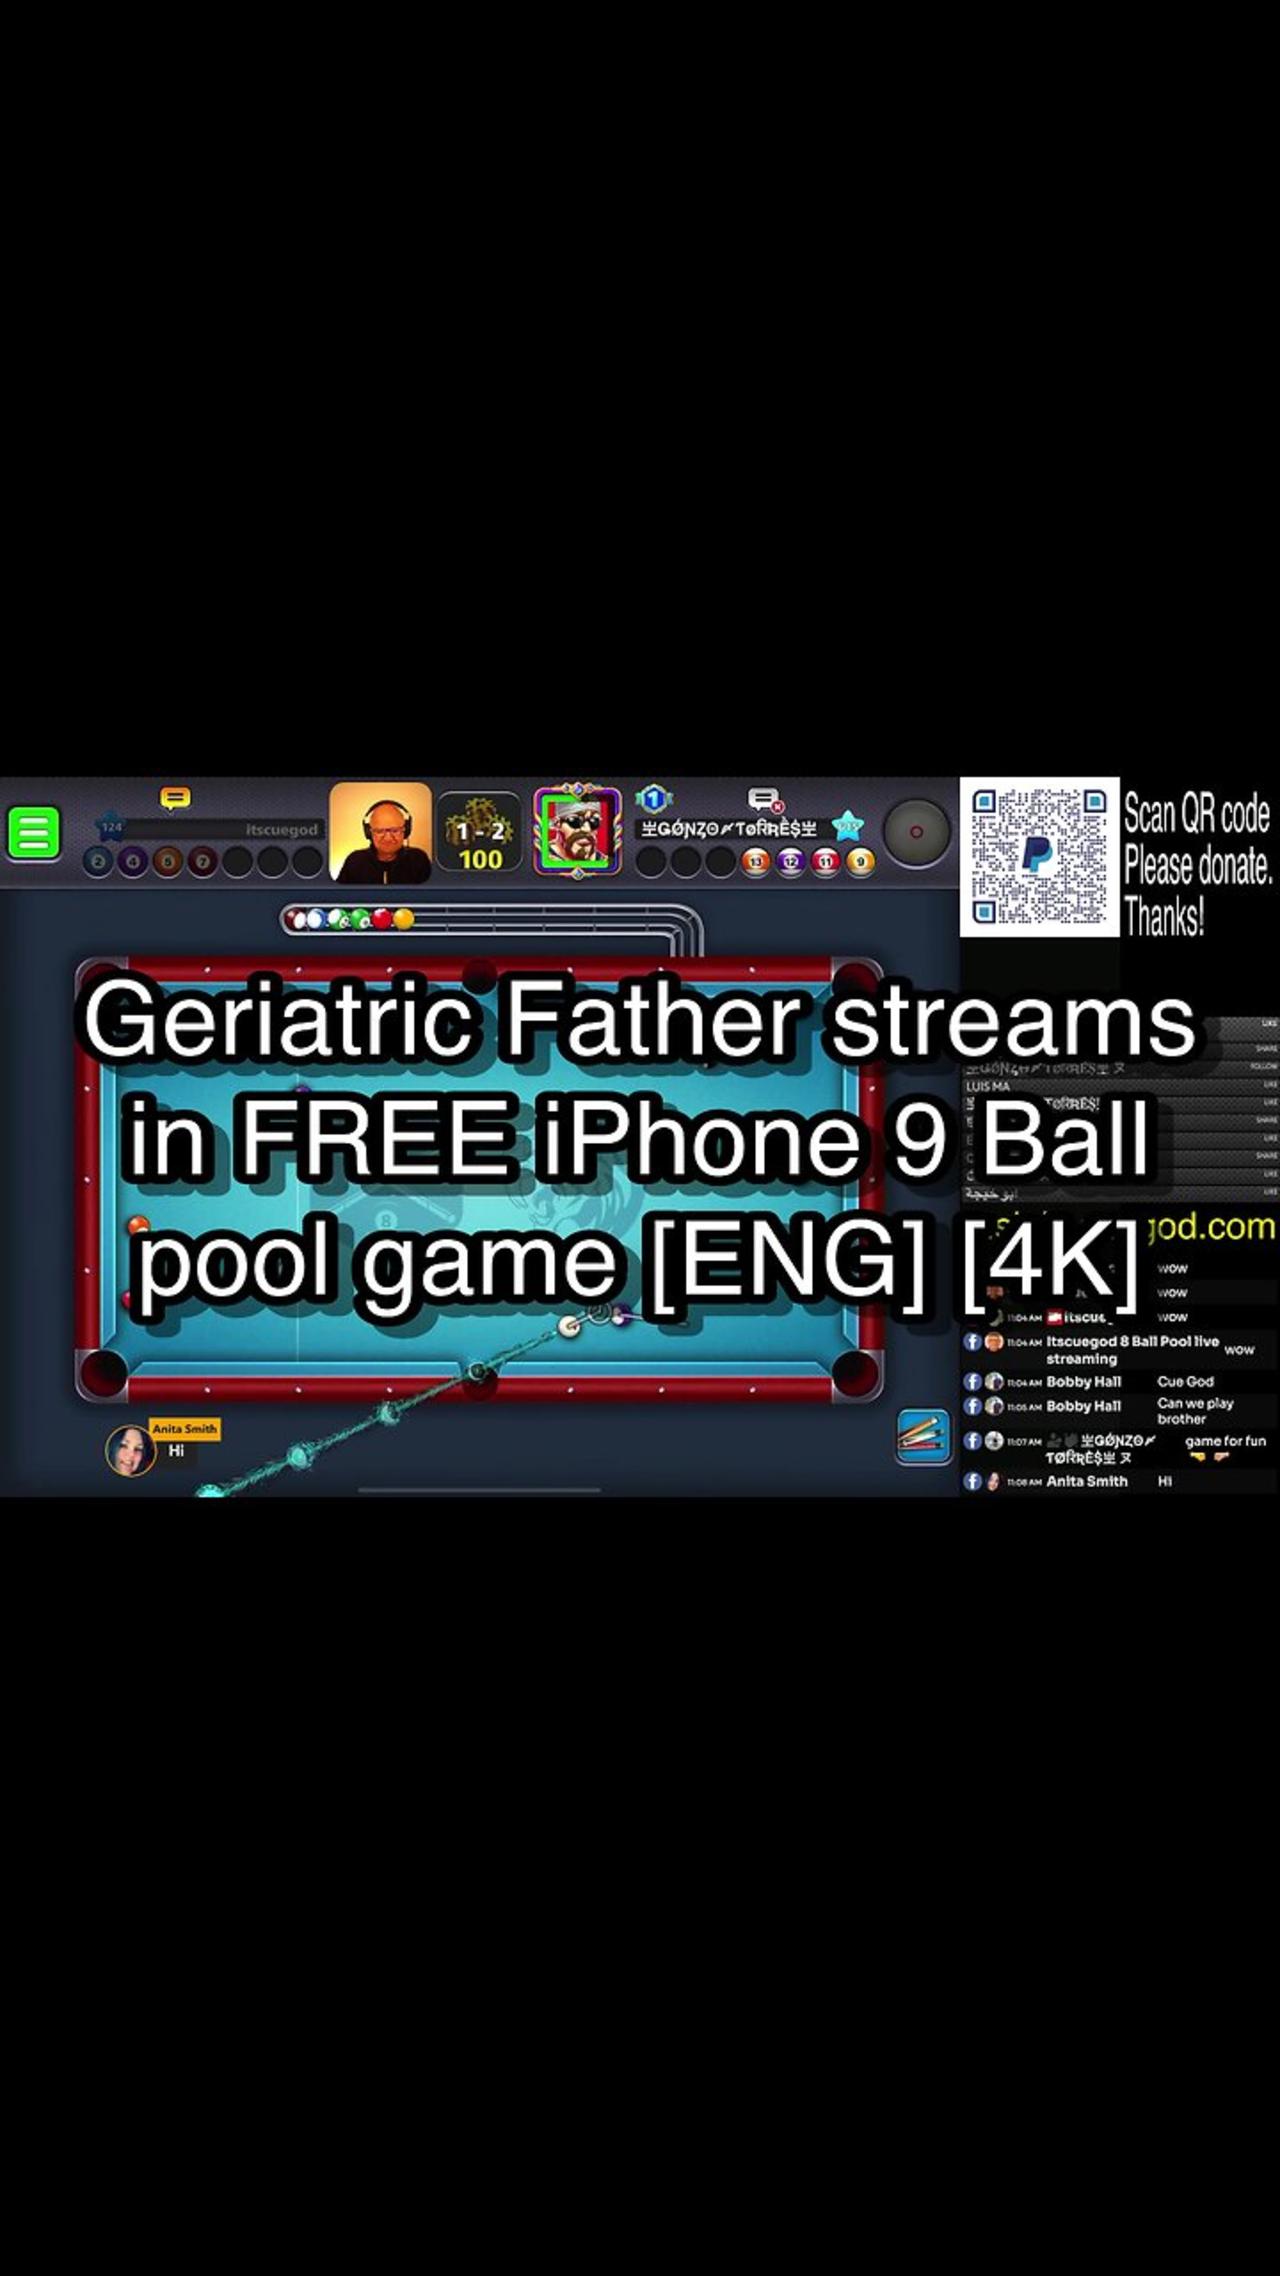 Geriatric Father streams in FREE iPhone 9 Ball pool game [ENG] [4K] 🎱🎱🎱 8 Ball Pool 🎱🎱🎱